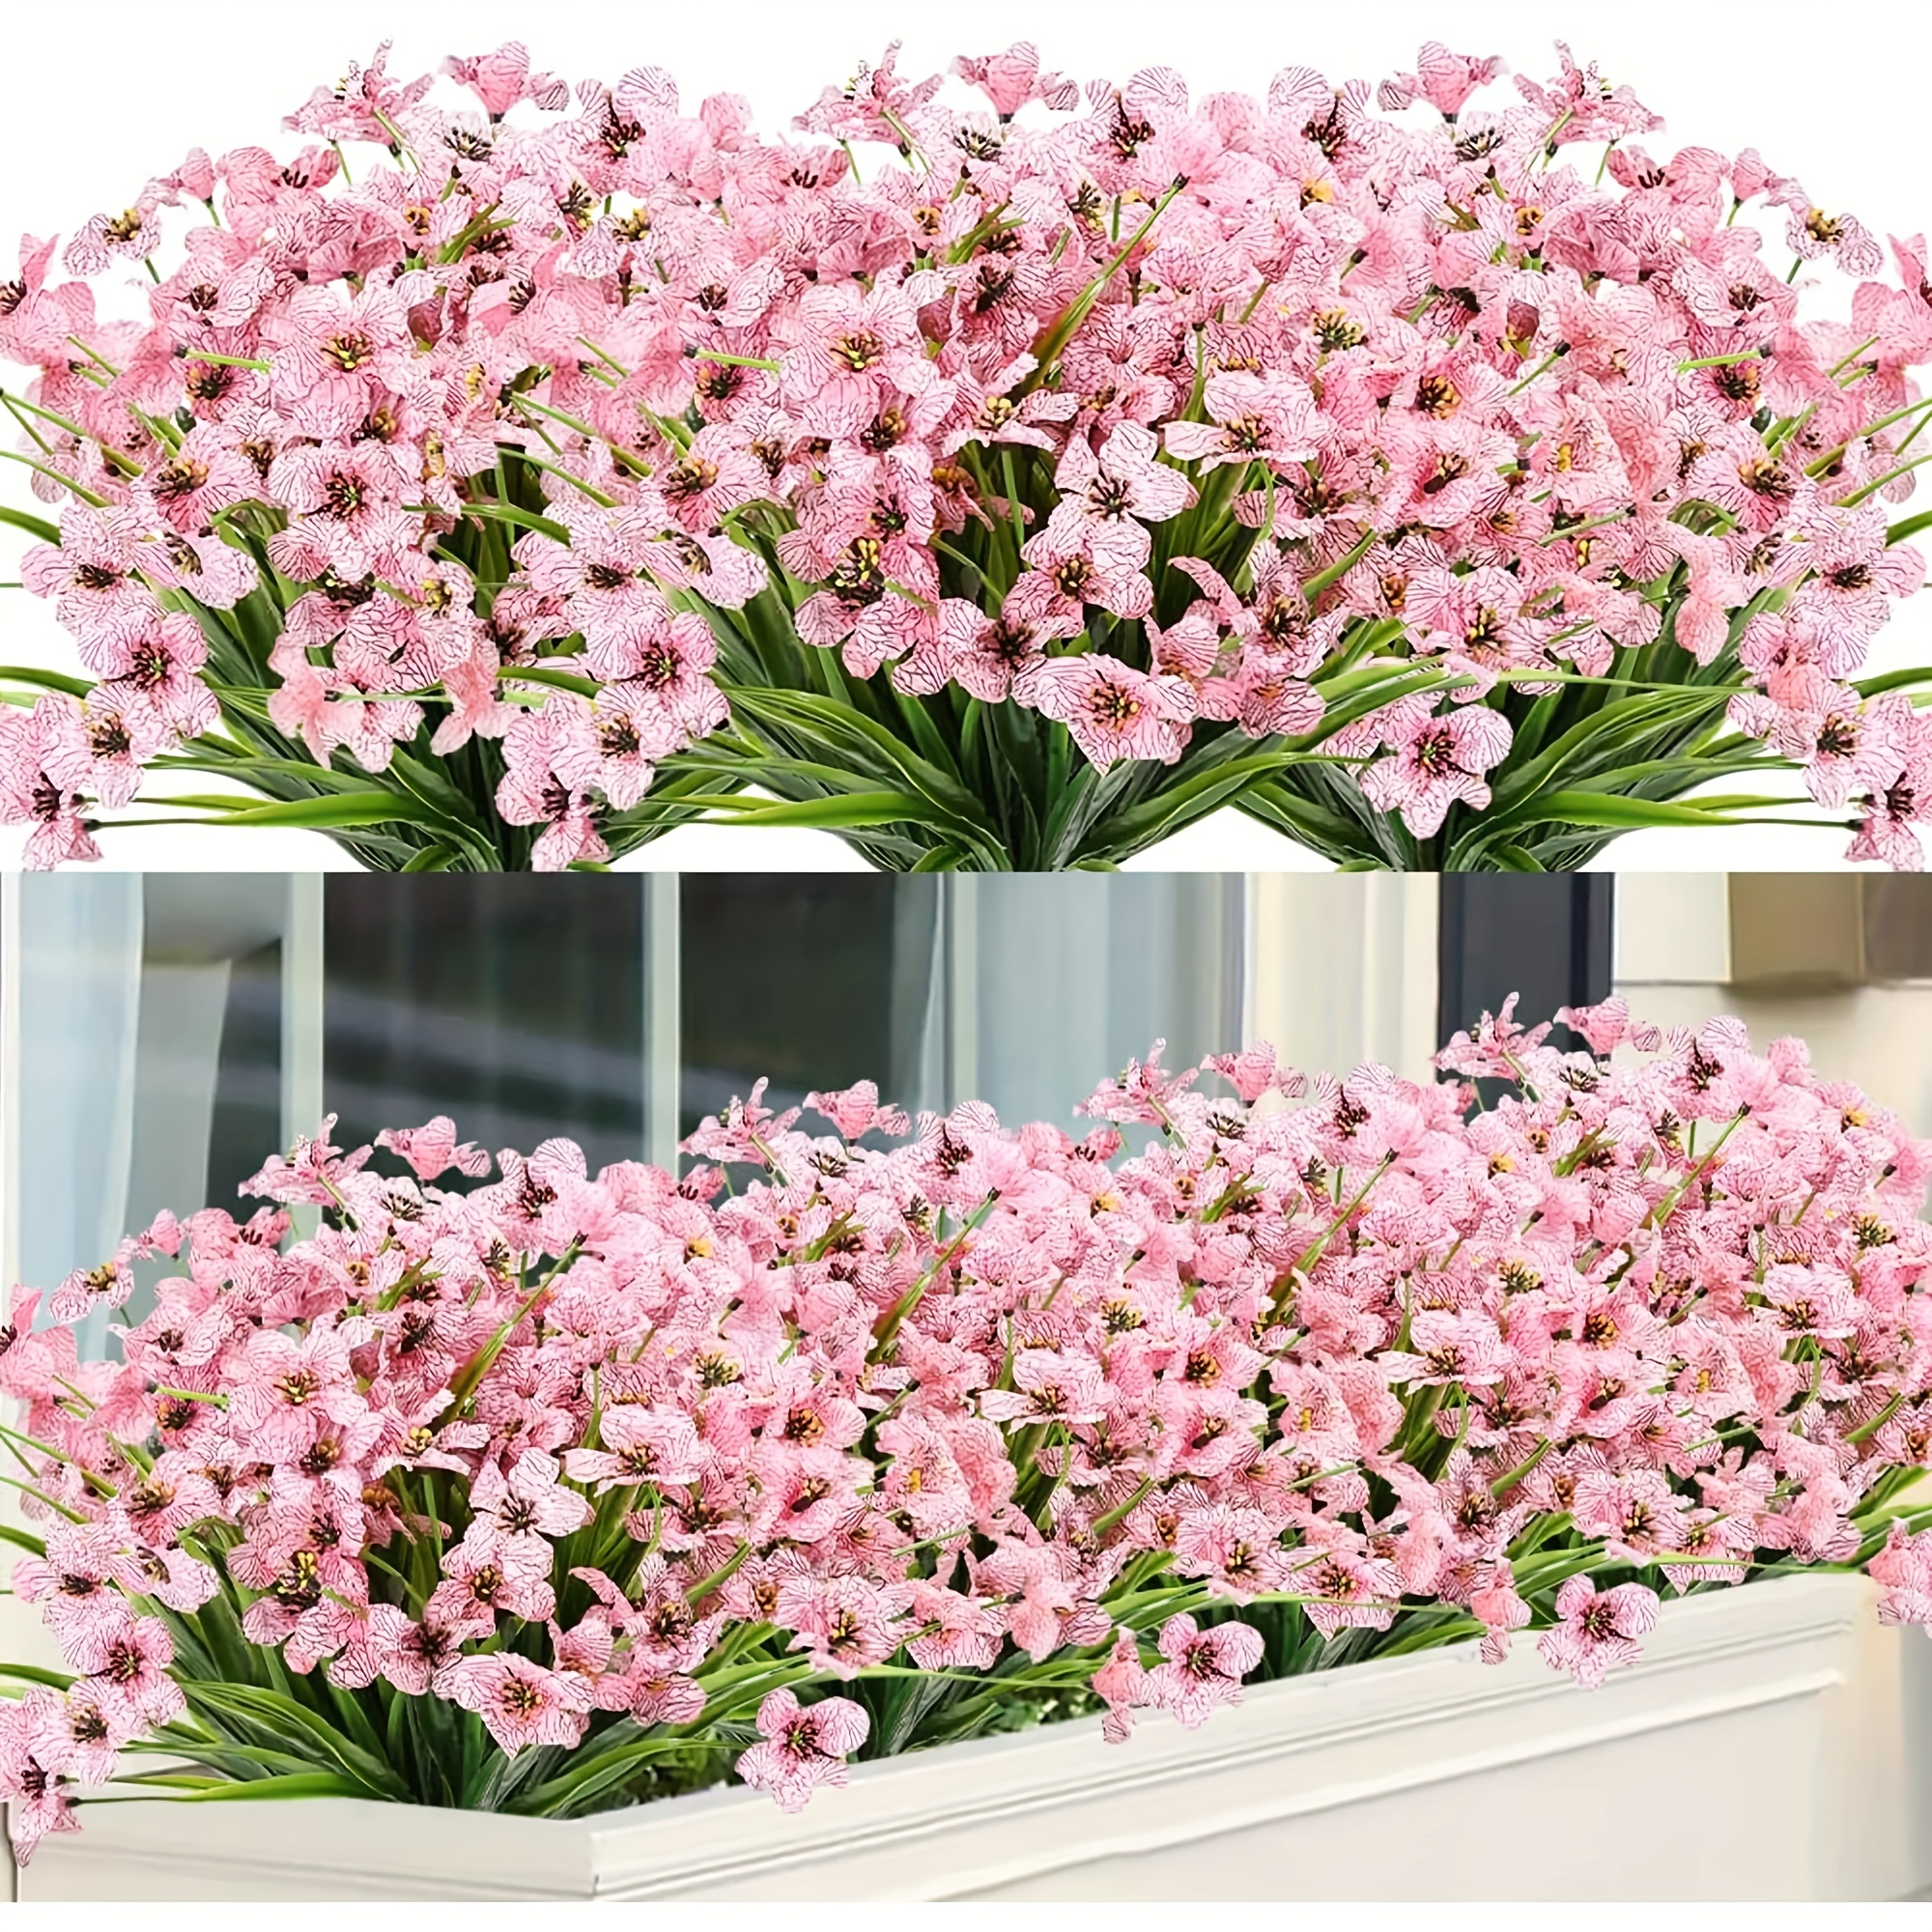 

6pcs Artificial Violet Flowers, Outdoor Uv Resistant No Fade Fake Flowers For Indoor Decoor, Outside Hanging Plants Garden Patio Porch Window Box Home Wedding Farmhouse Decor, Spring Summer Decor